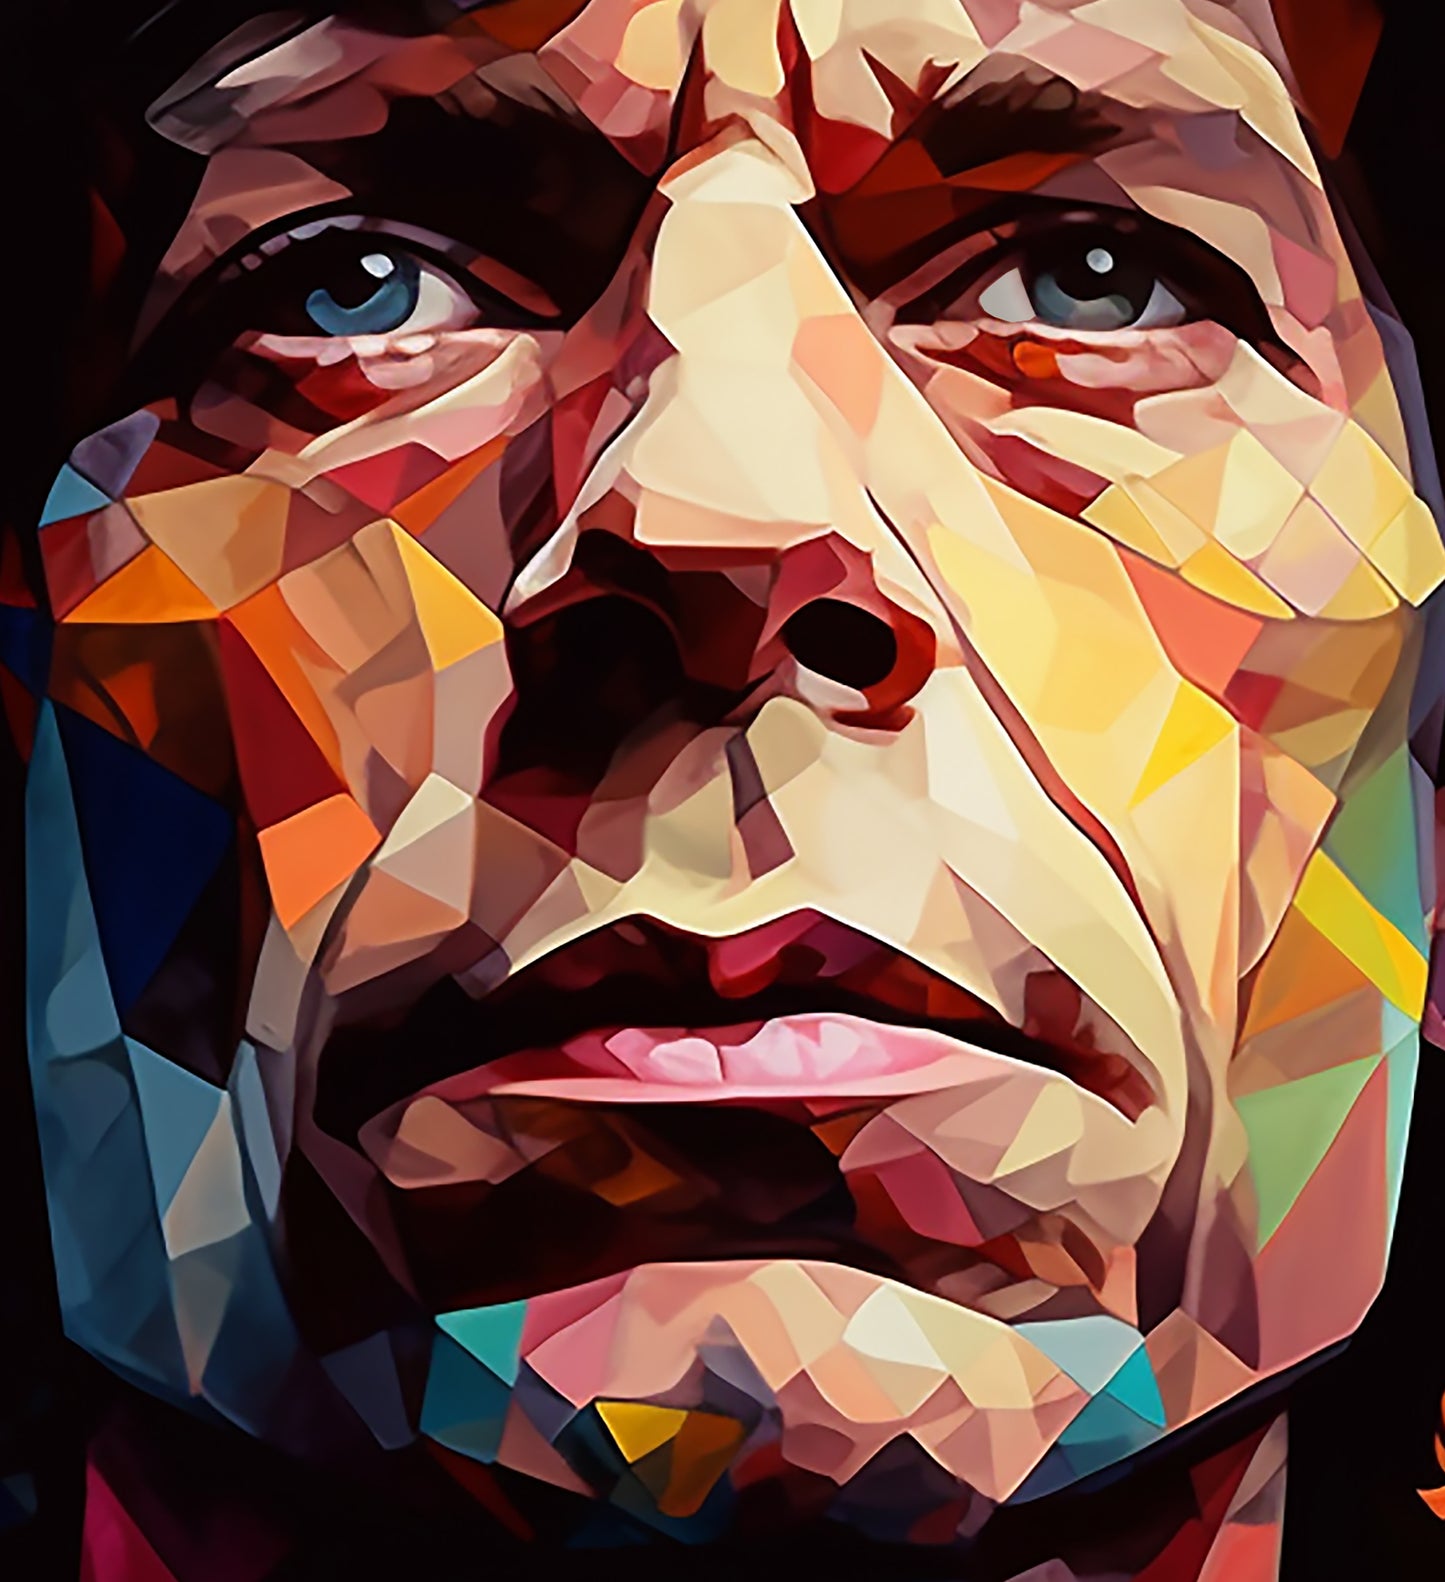 " SIR MICK PHILIP JAGGER " MIX MEDIA ART WORK ON CANVAS 24 X 36 Inches